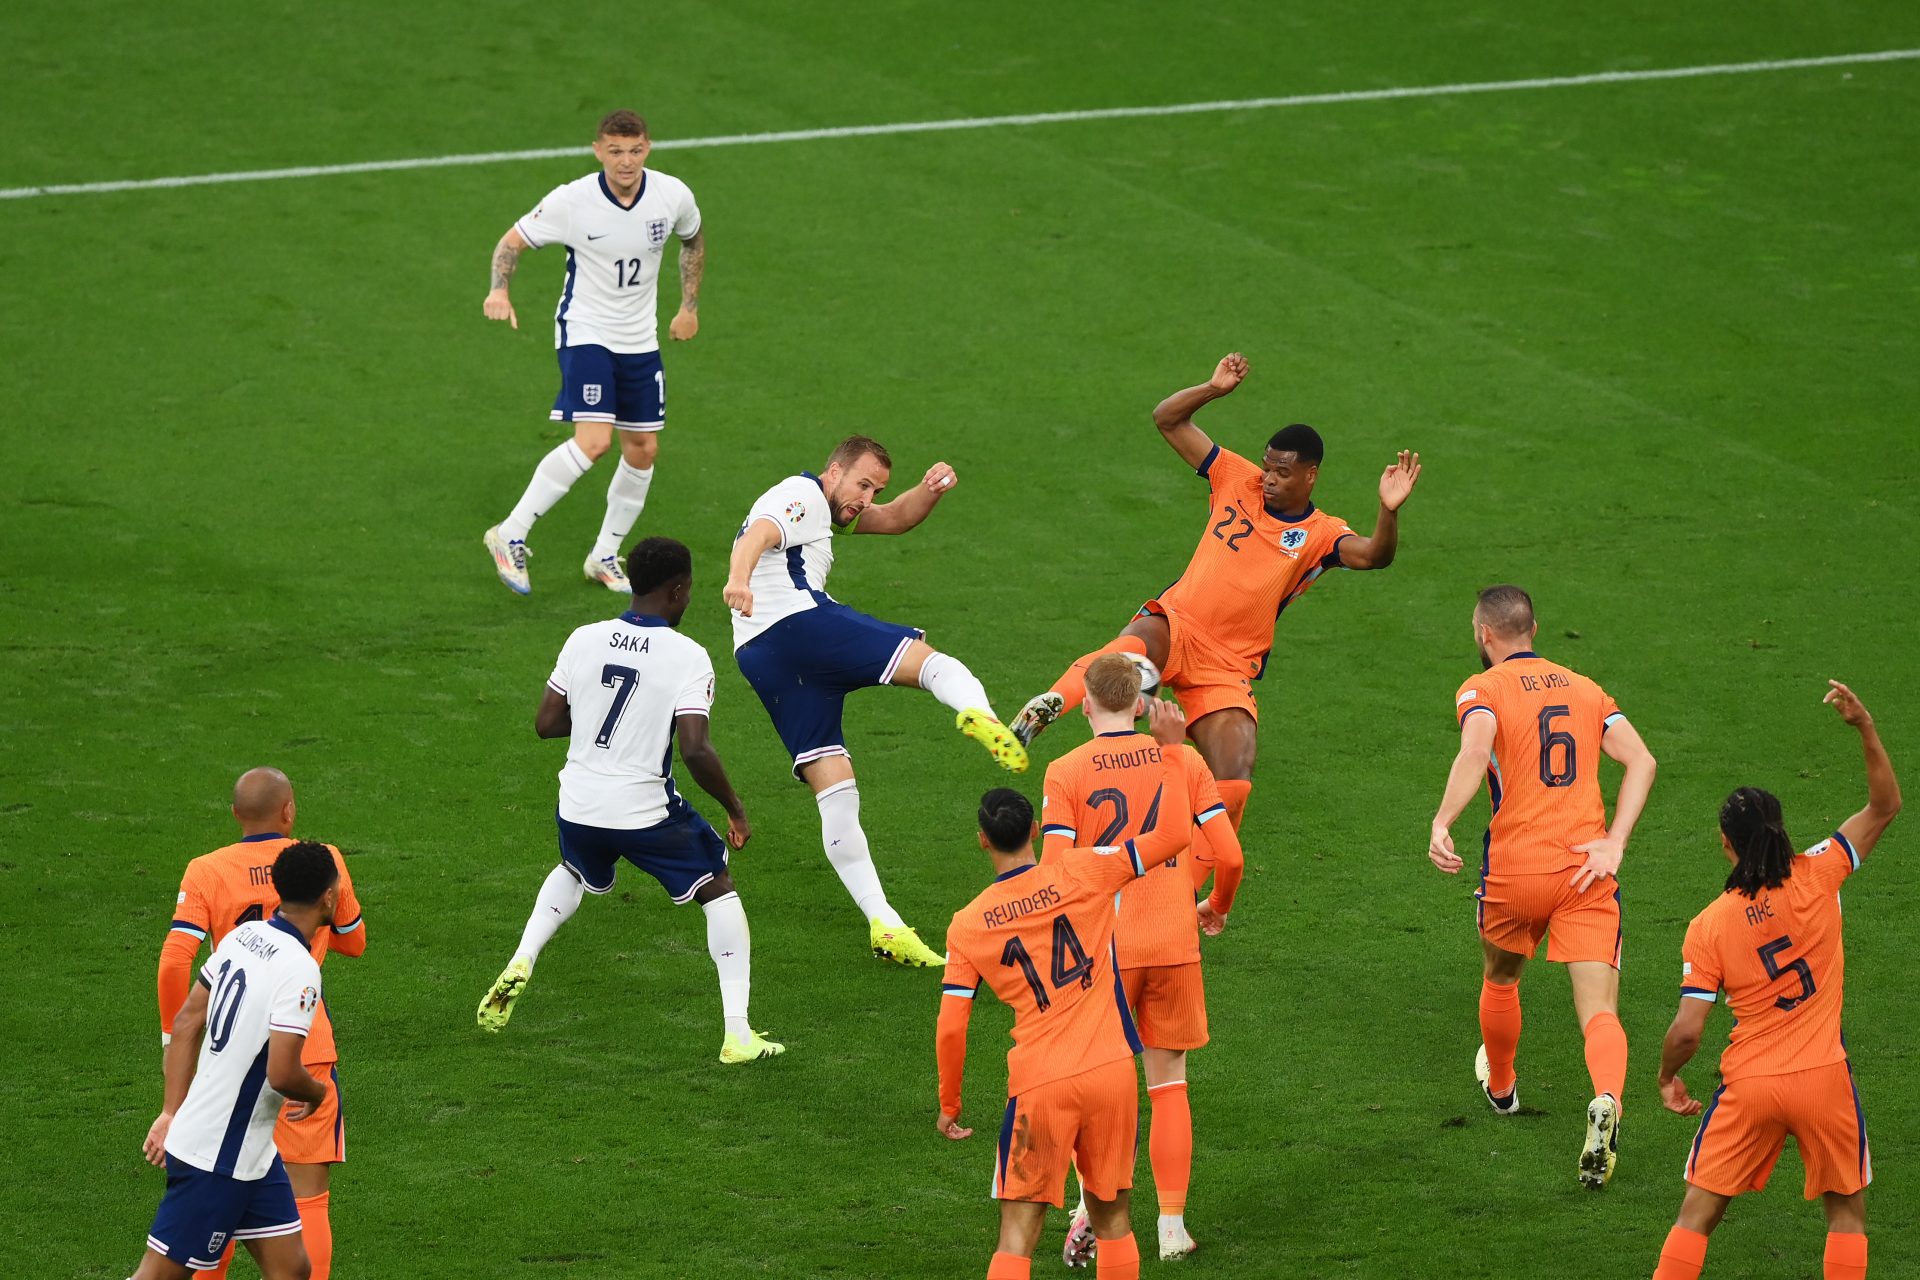 England 'handed' a penalty